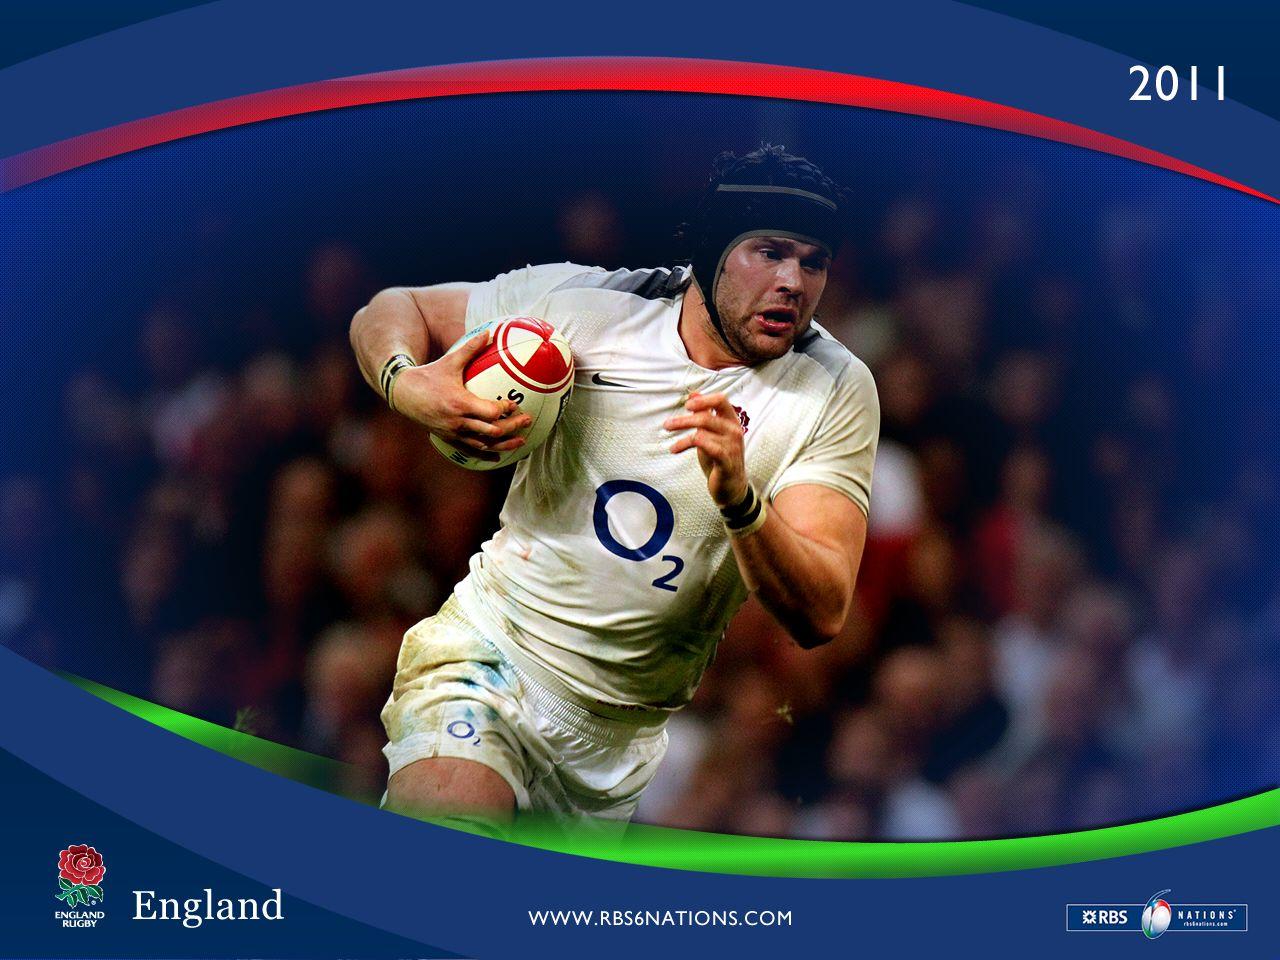 Six Nations Rugby image England 2011 HD wallpaper and background